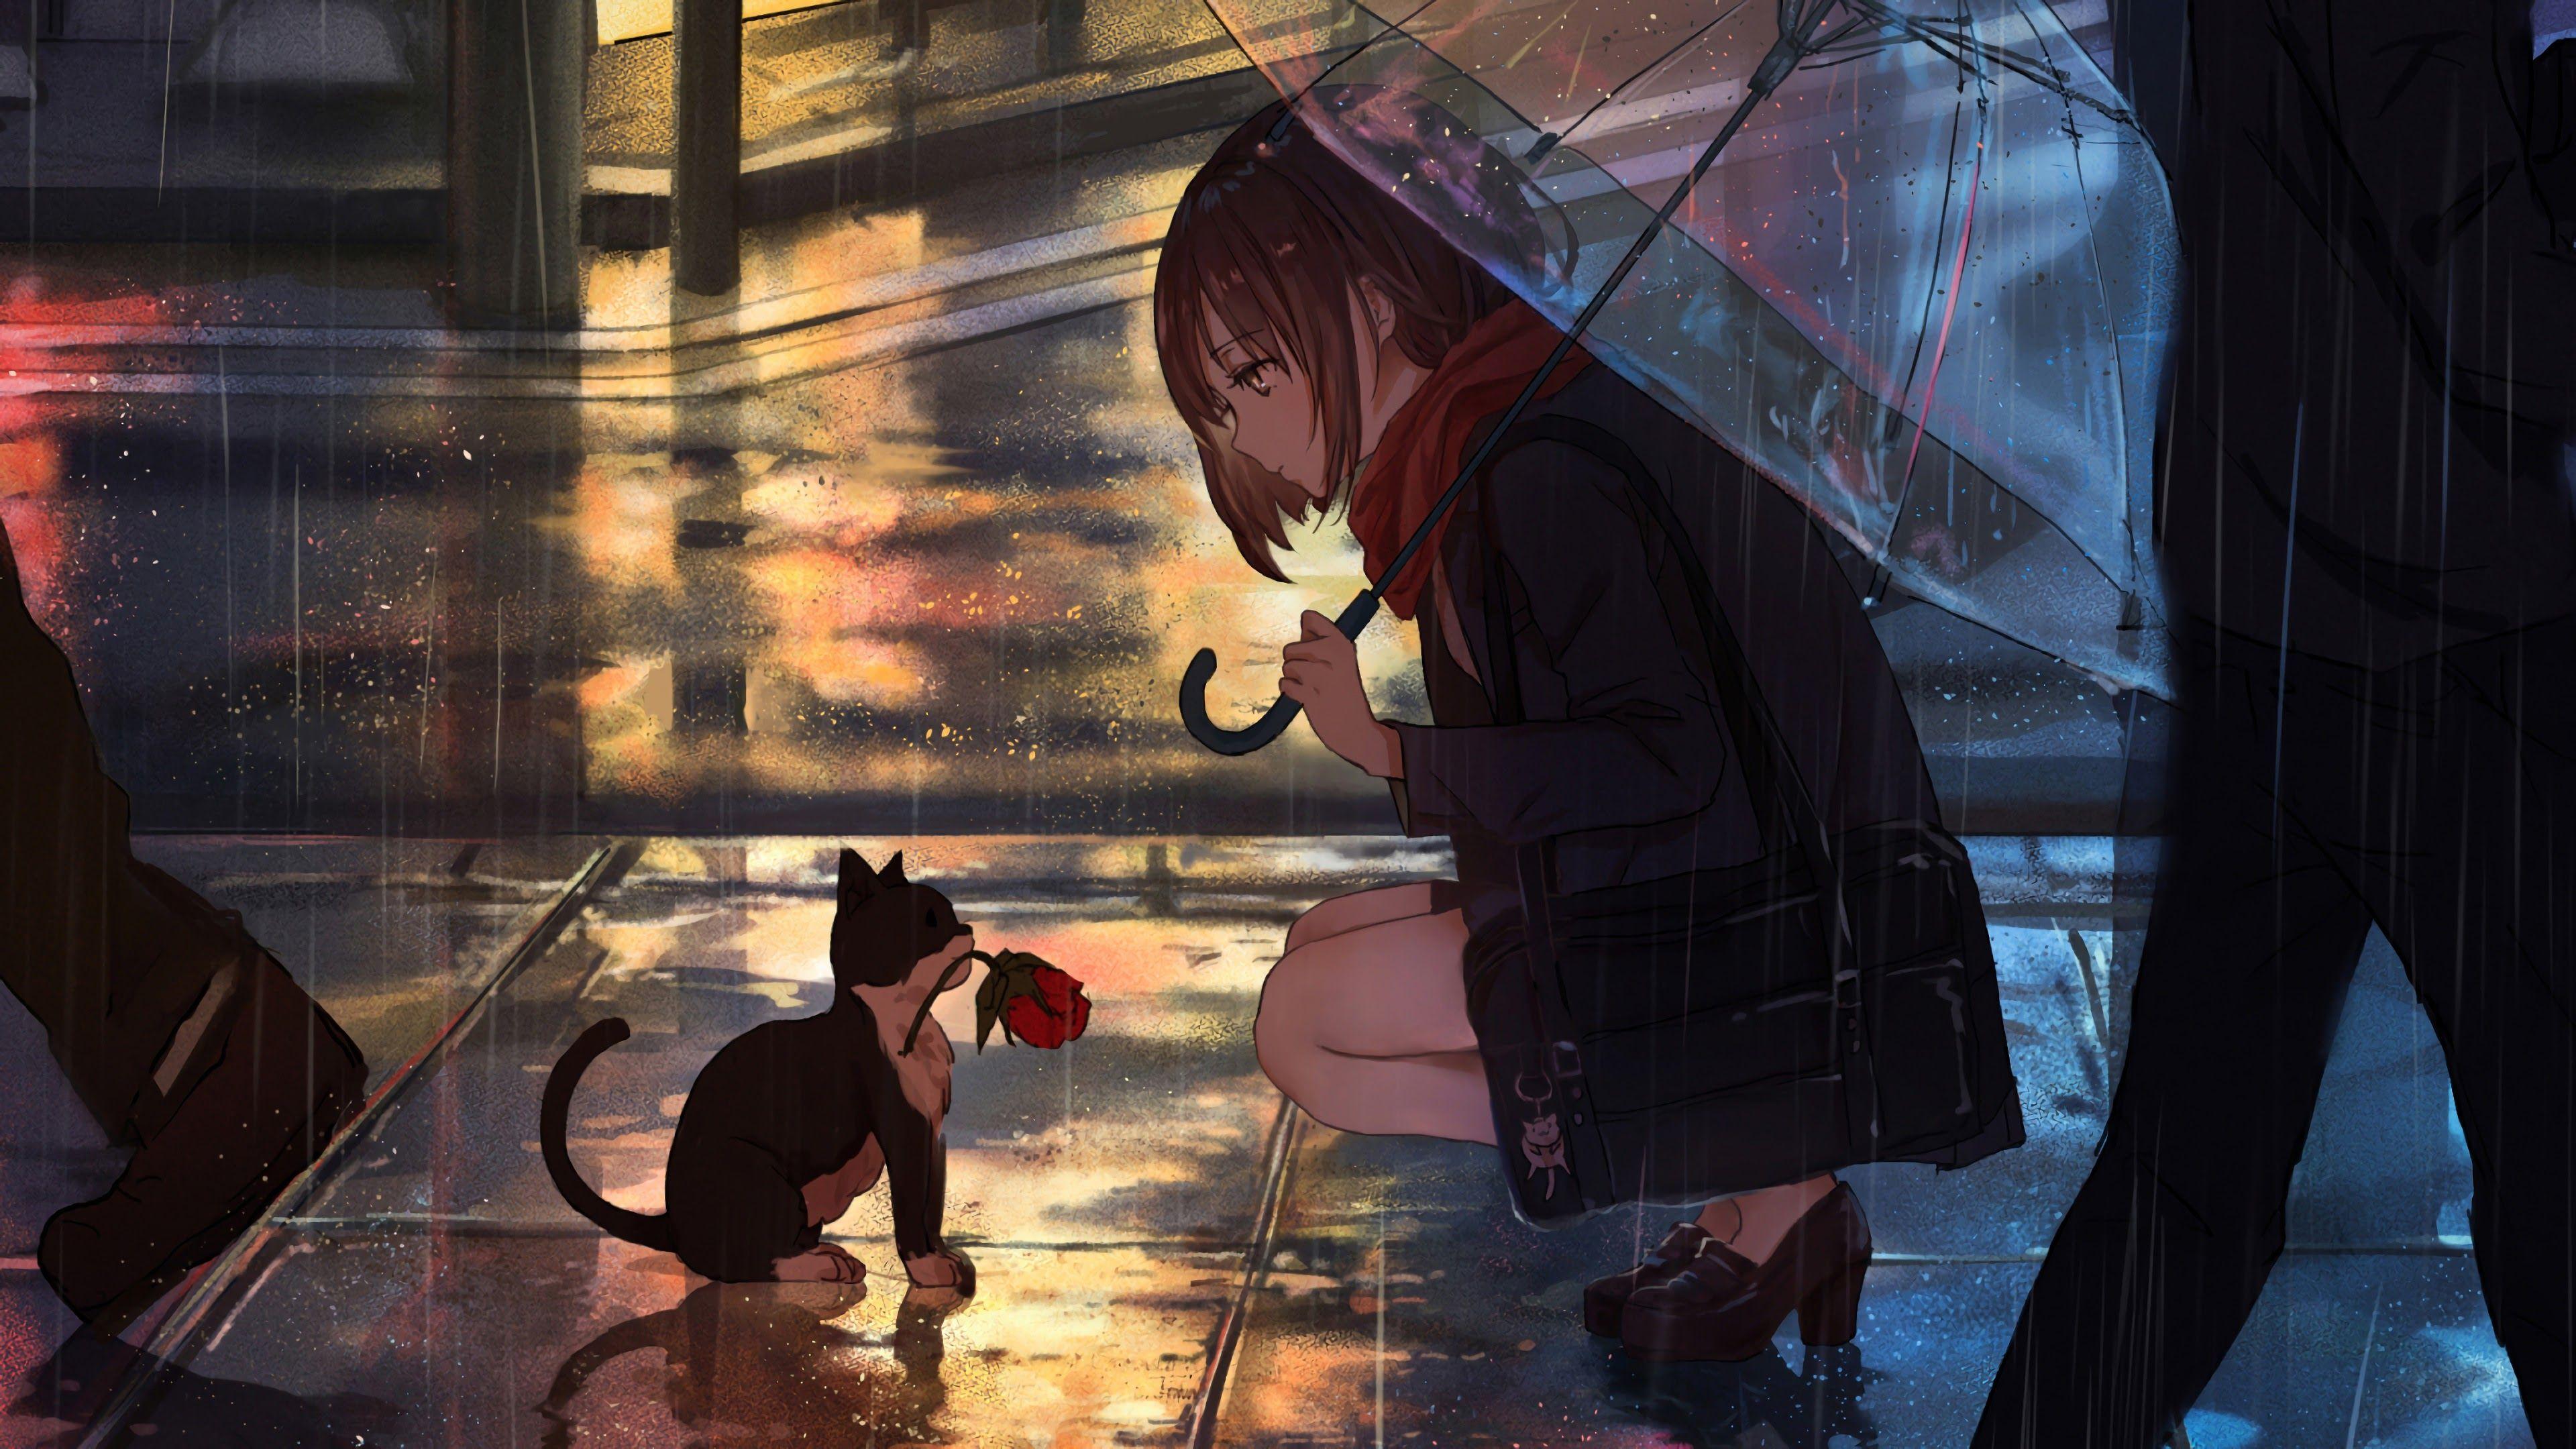 Rain Anime Girl 4k Wallpapers Top Free Rain Anime Girl 4k Backgrounds Wallpaperaccess Use purchase button on the right side of this page! rain anime girl 4k wallpapers top